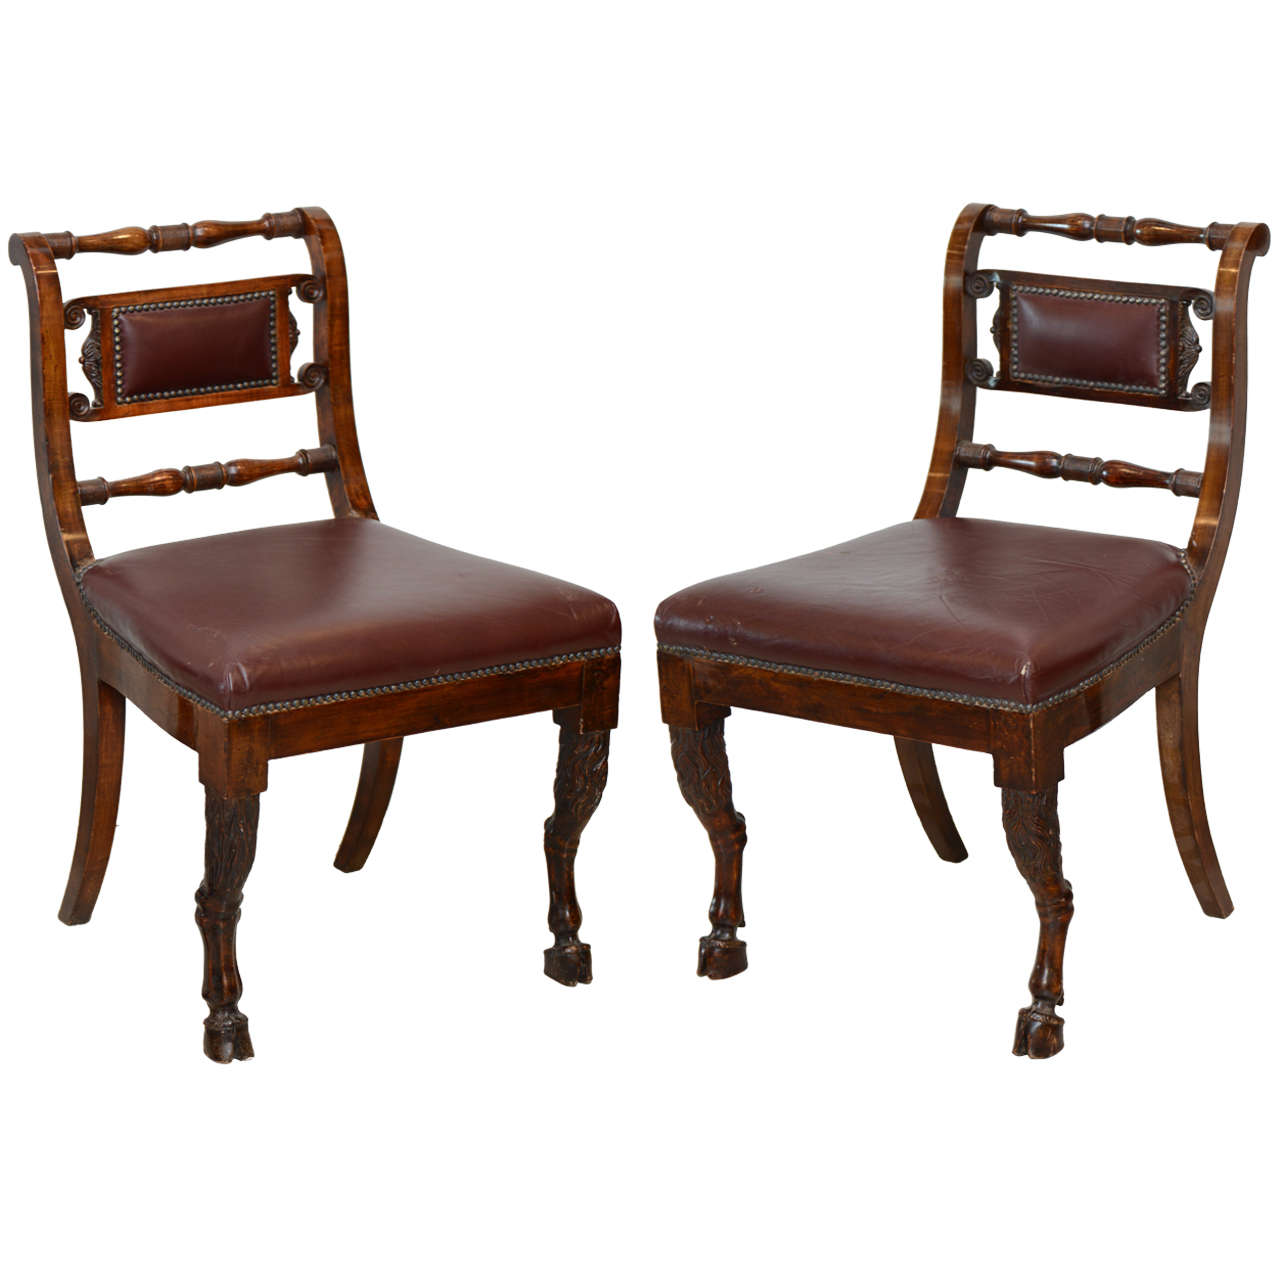 Set of Four Italian Empire Walnut Sidechairs, Early 19th Century For Sale